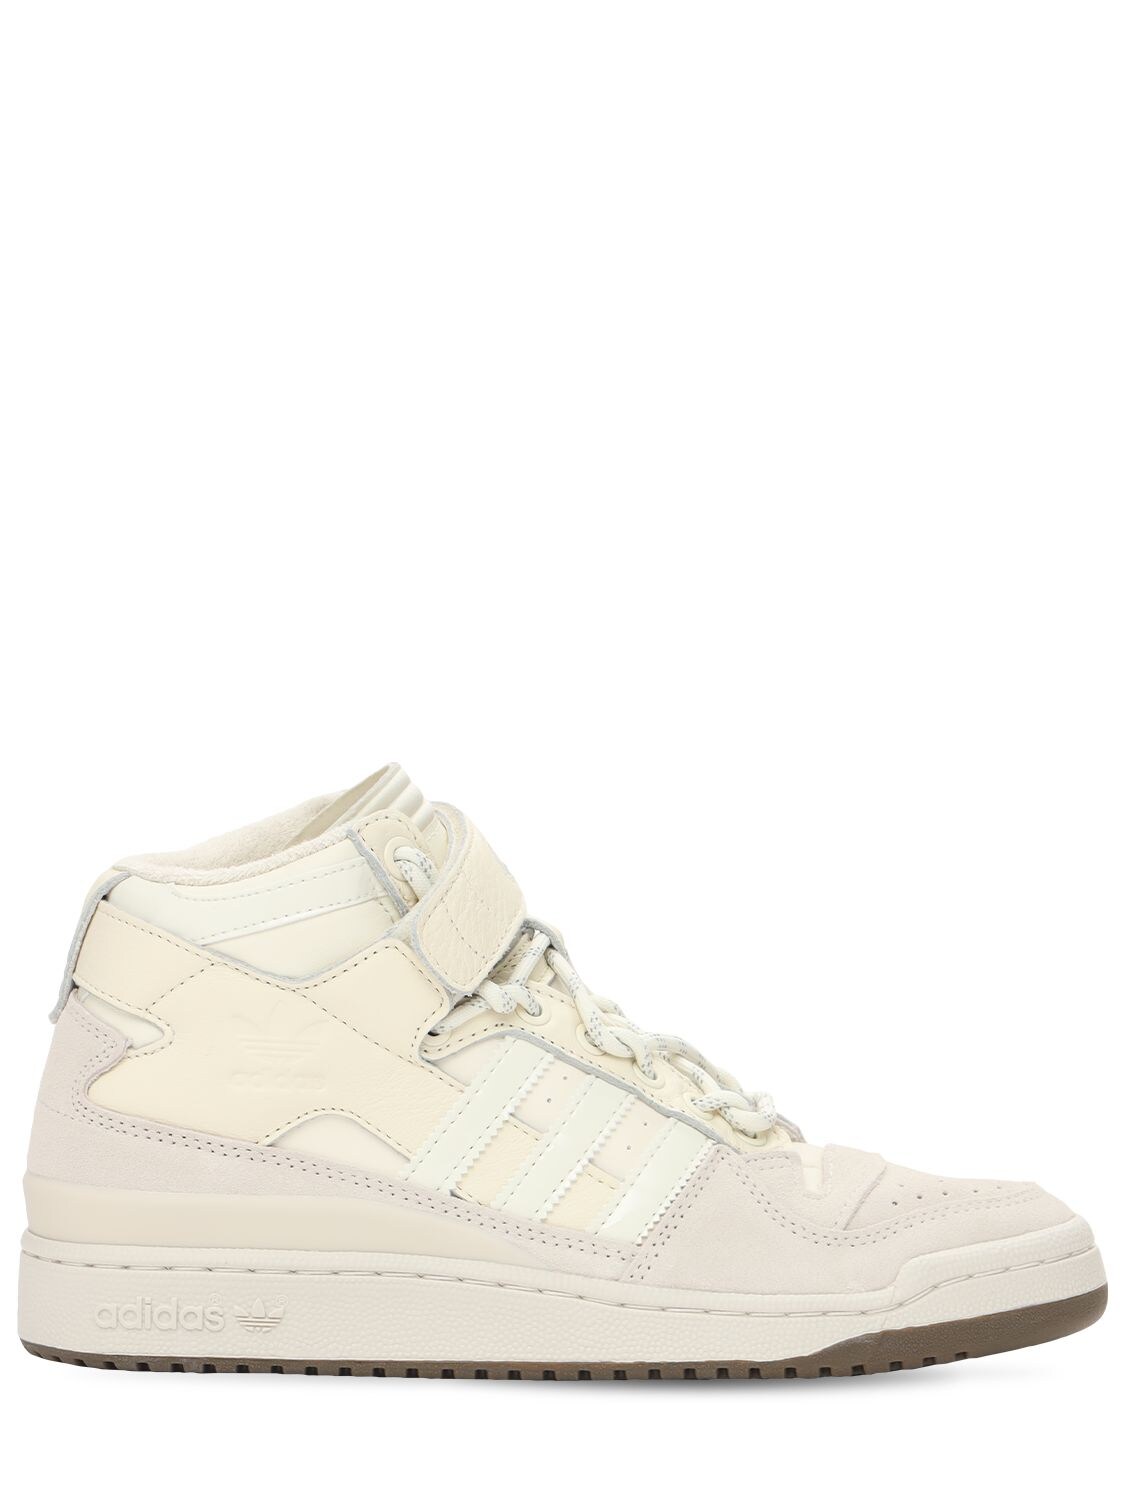 Adidas X Ivy Park Forum Mid Trainers In Cream,white